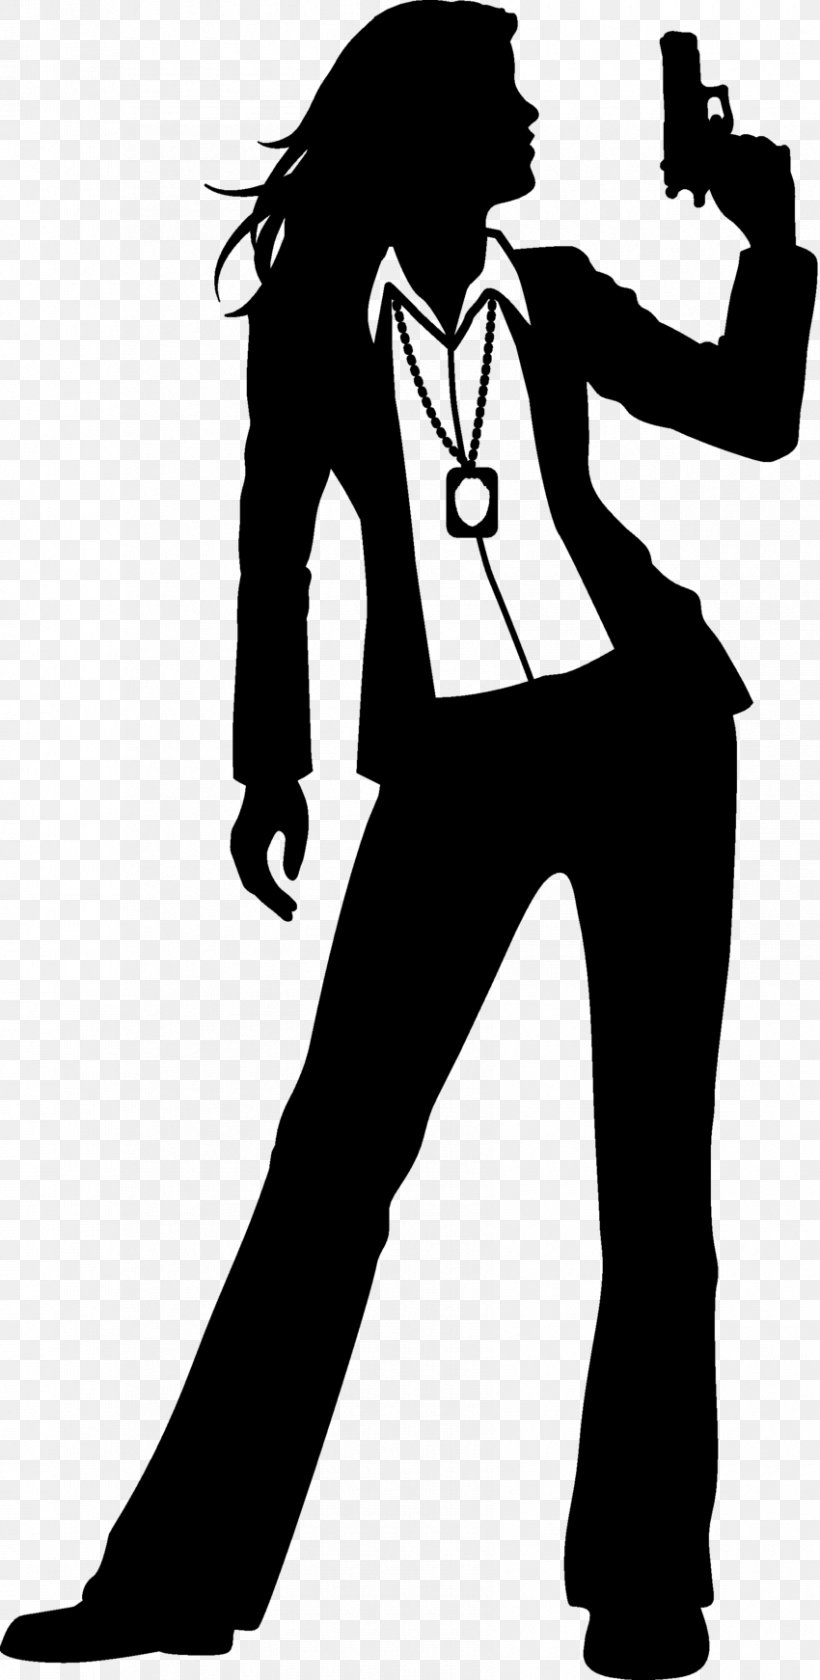 Human Behavior Shoe Silhouette Character, PNG, 850x1742px, Human Behavior, Art, Behavior, Black, Black And White Download Free